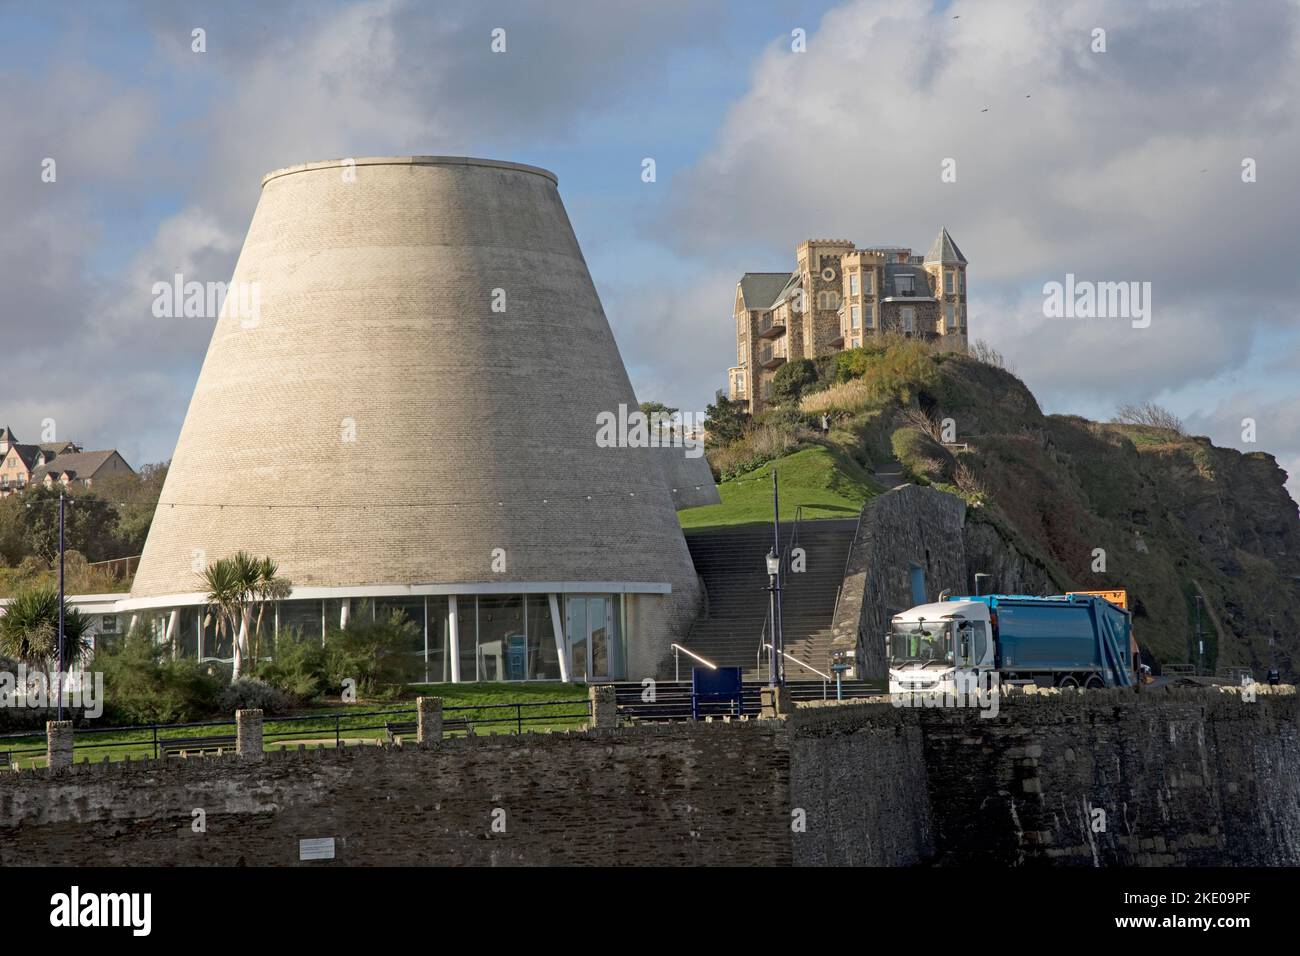 Two conical towers of the Landmark Theatre locally referred to as Madonna's Bra on the Promenade Ilfracombe with Granville Heights on the clifftop in Stock Photo